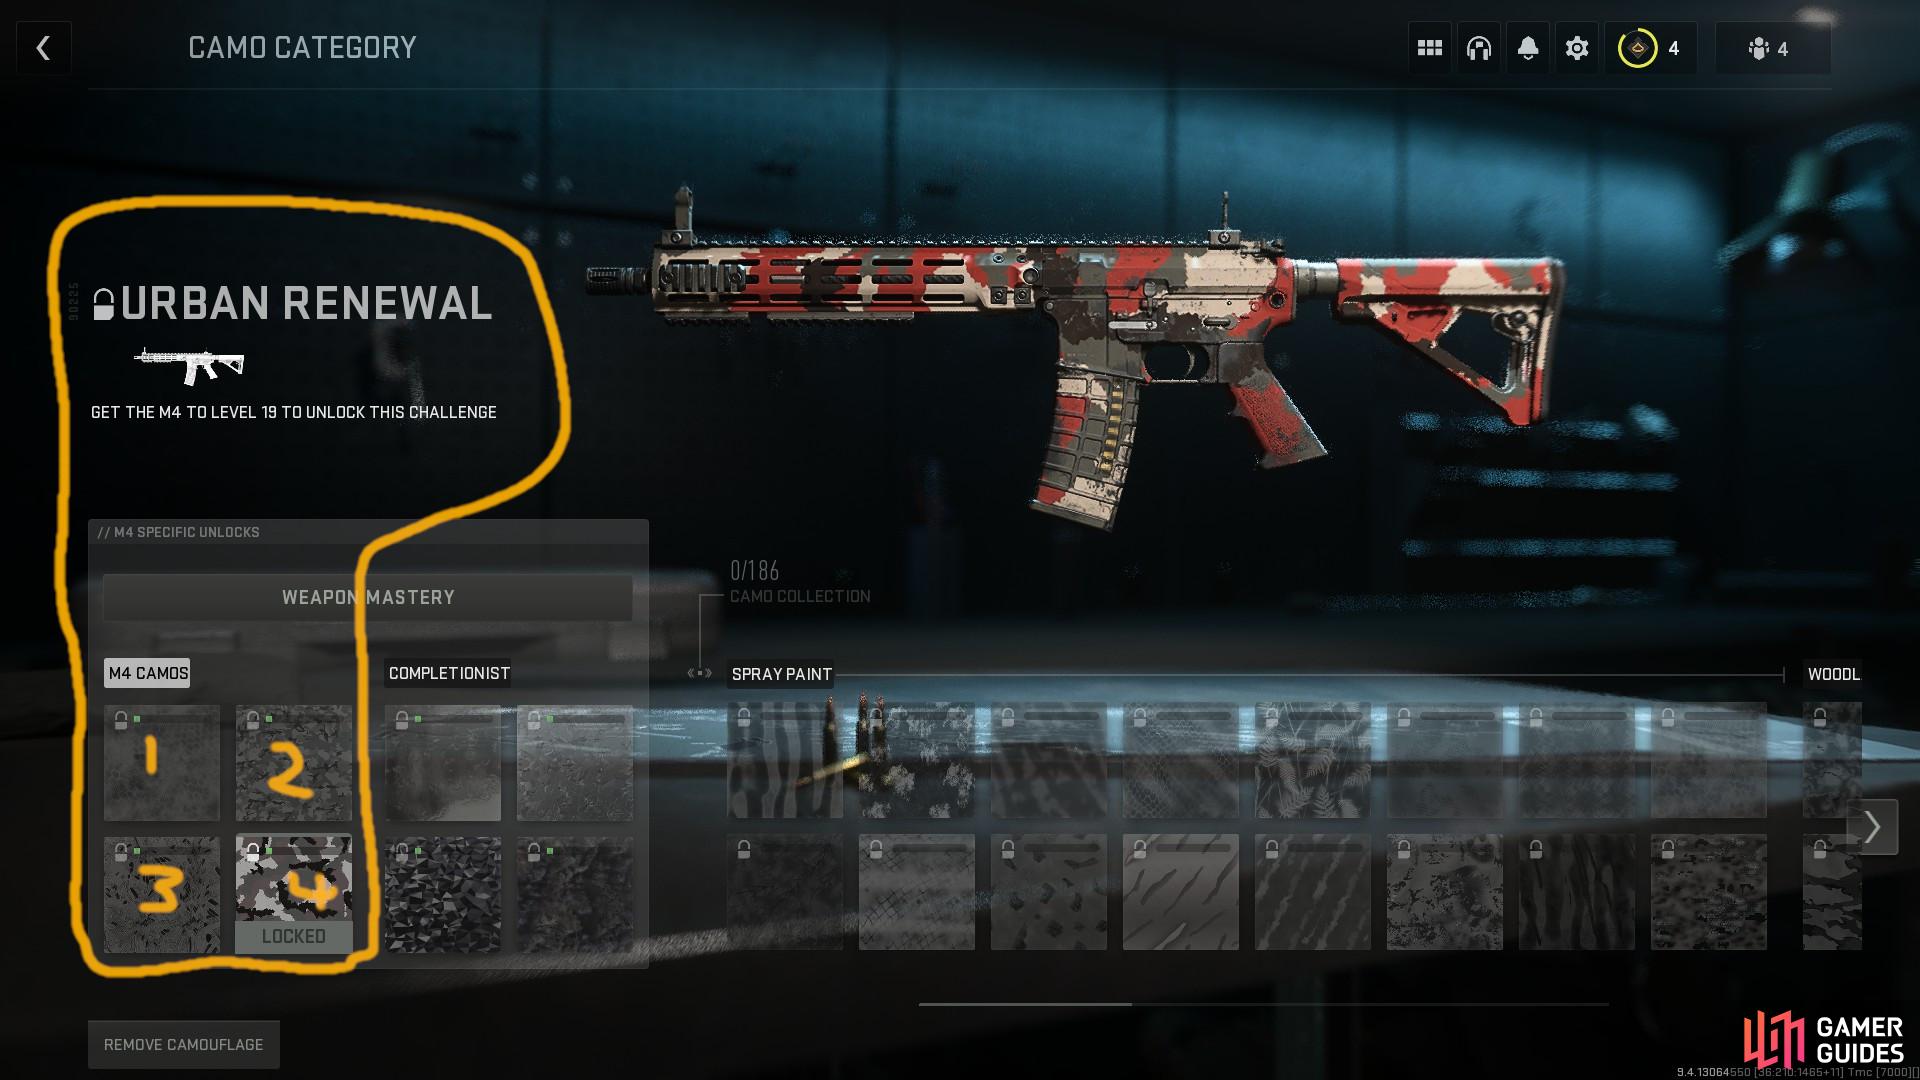 You need to level up your gun and unlock the weapon challenges before completing them to unlock gold camo.